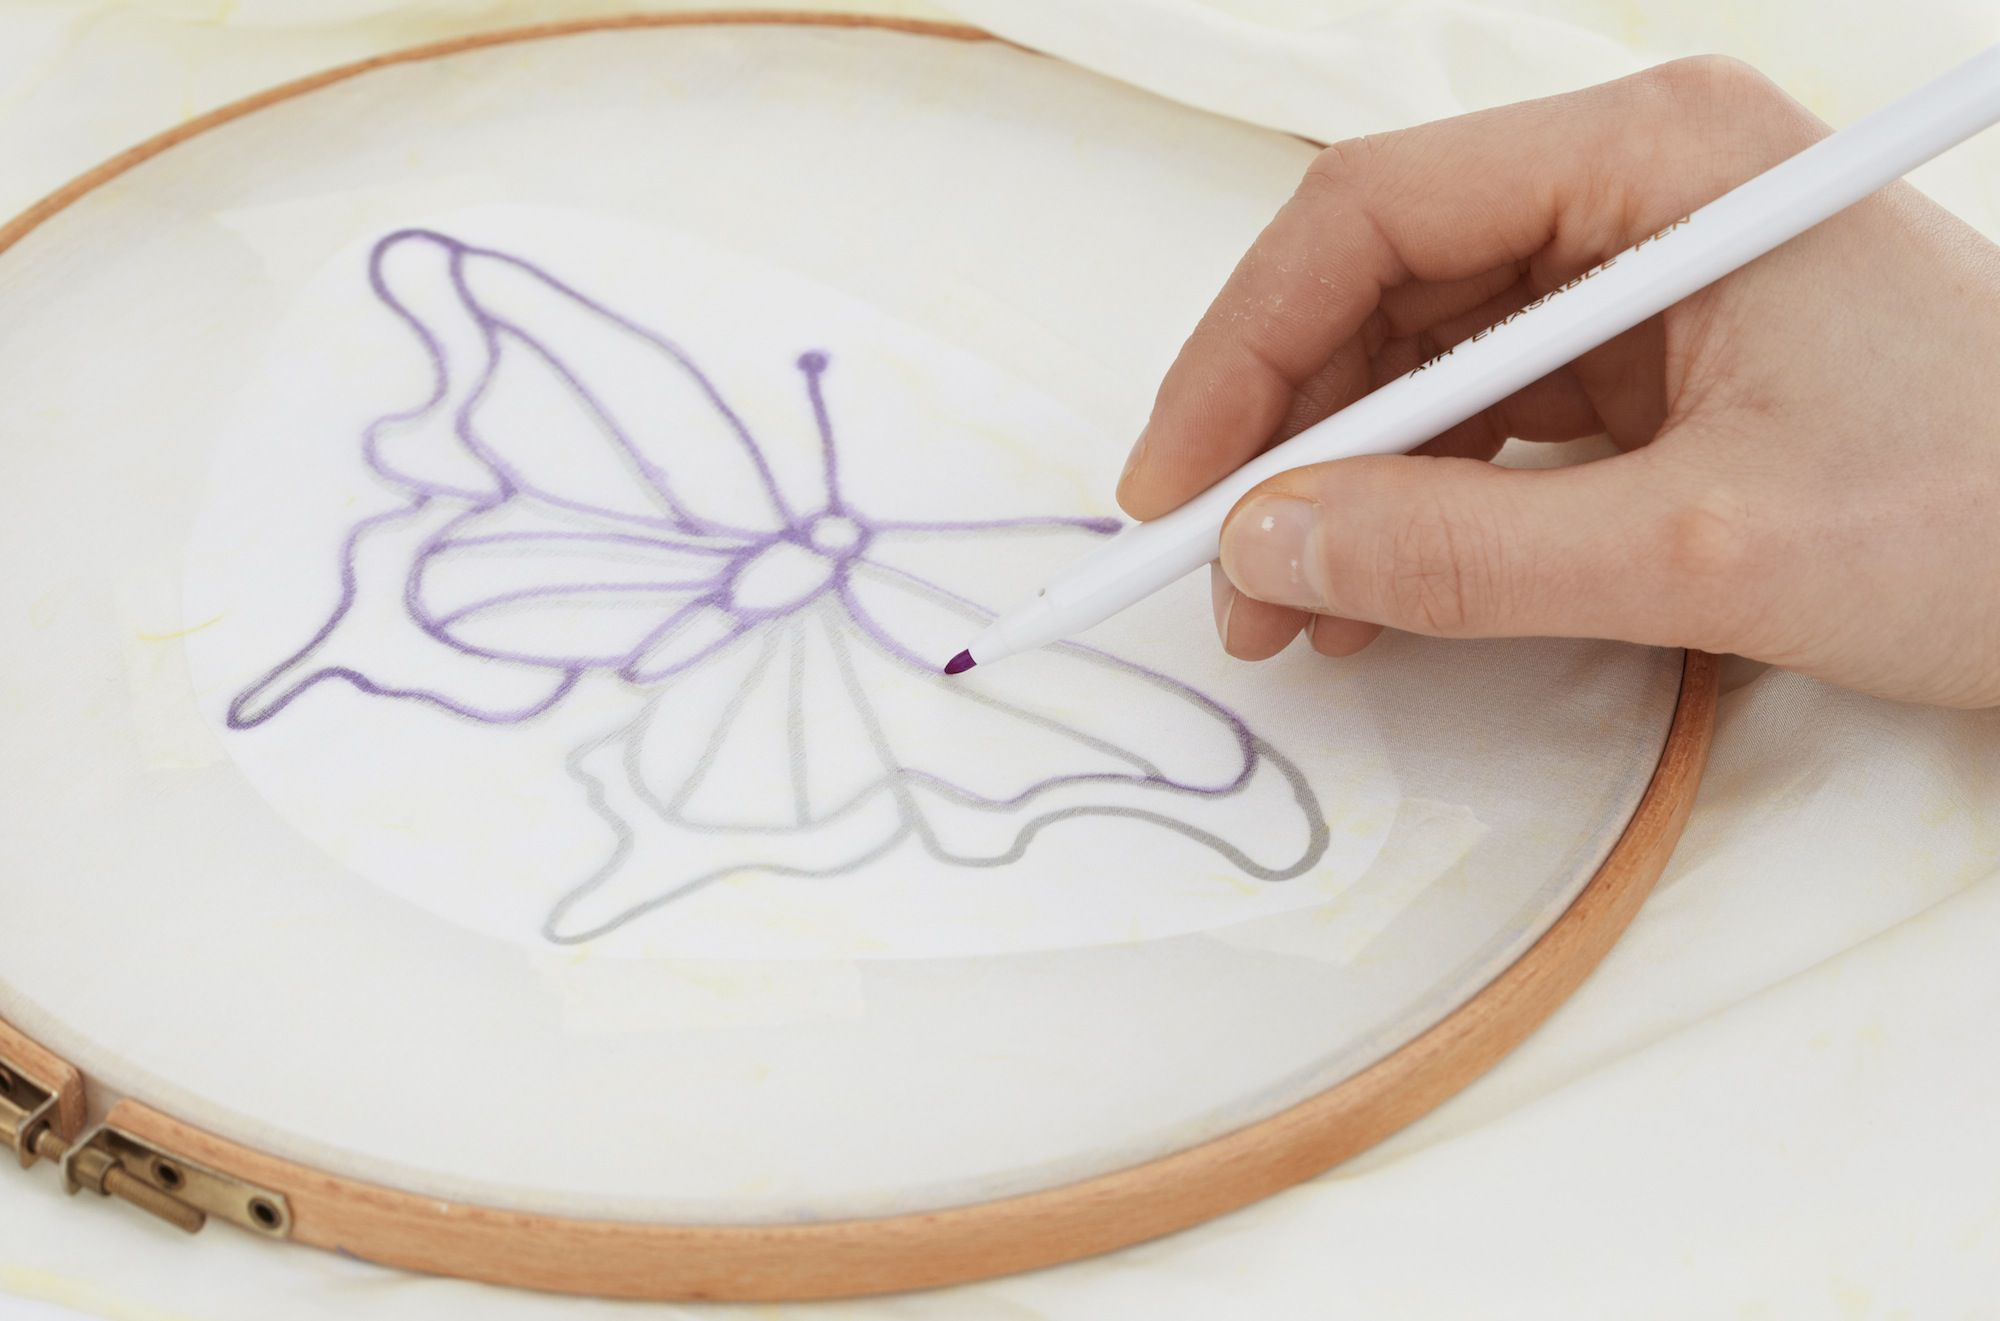 How To Make Your Own Embroidery Pattern 7 Methods For Marking Or Transferring Embroidery Patterns